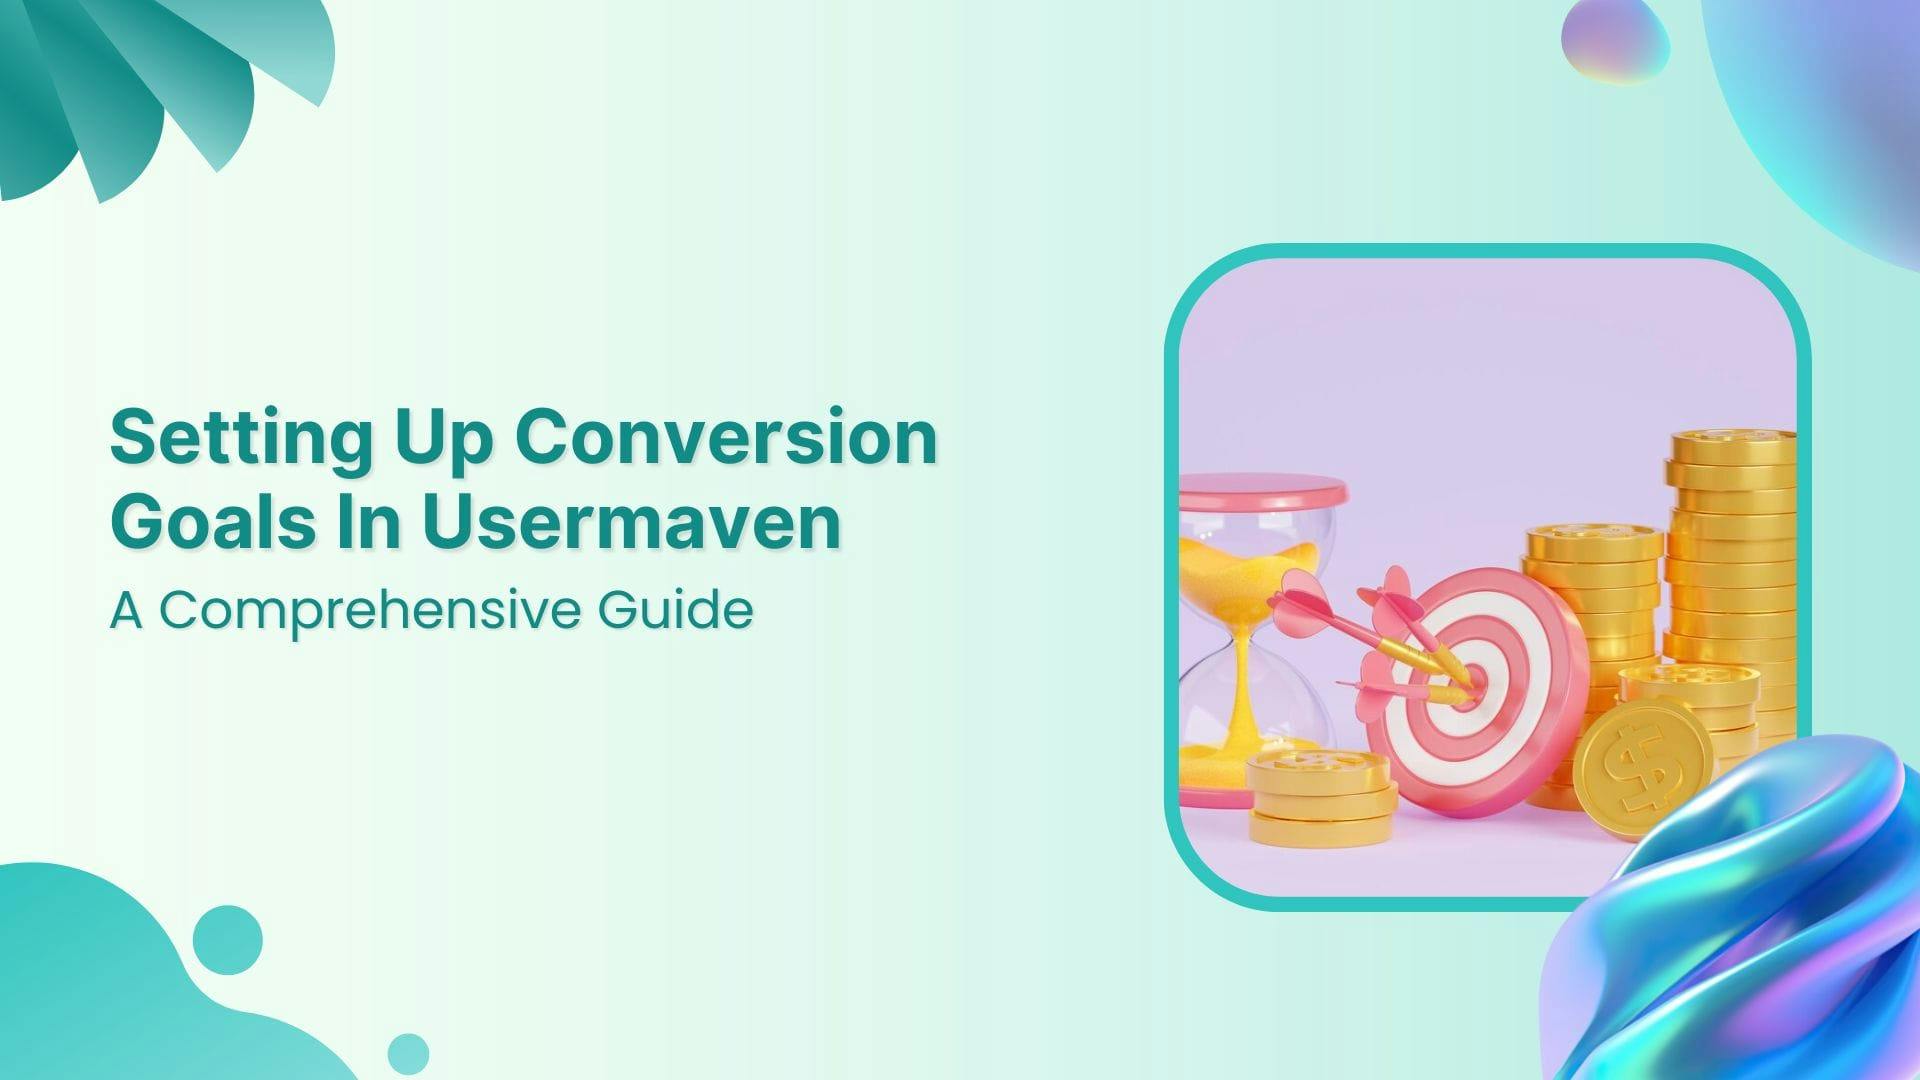 A Guide to Setting Up Conversion Goals in Usermaven